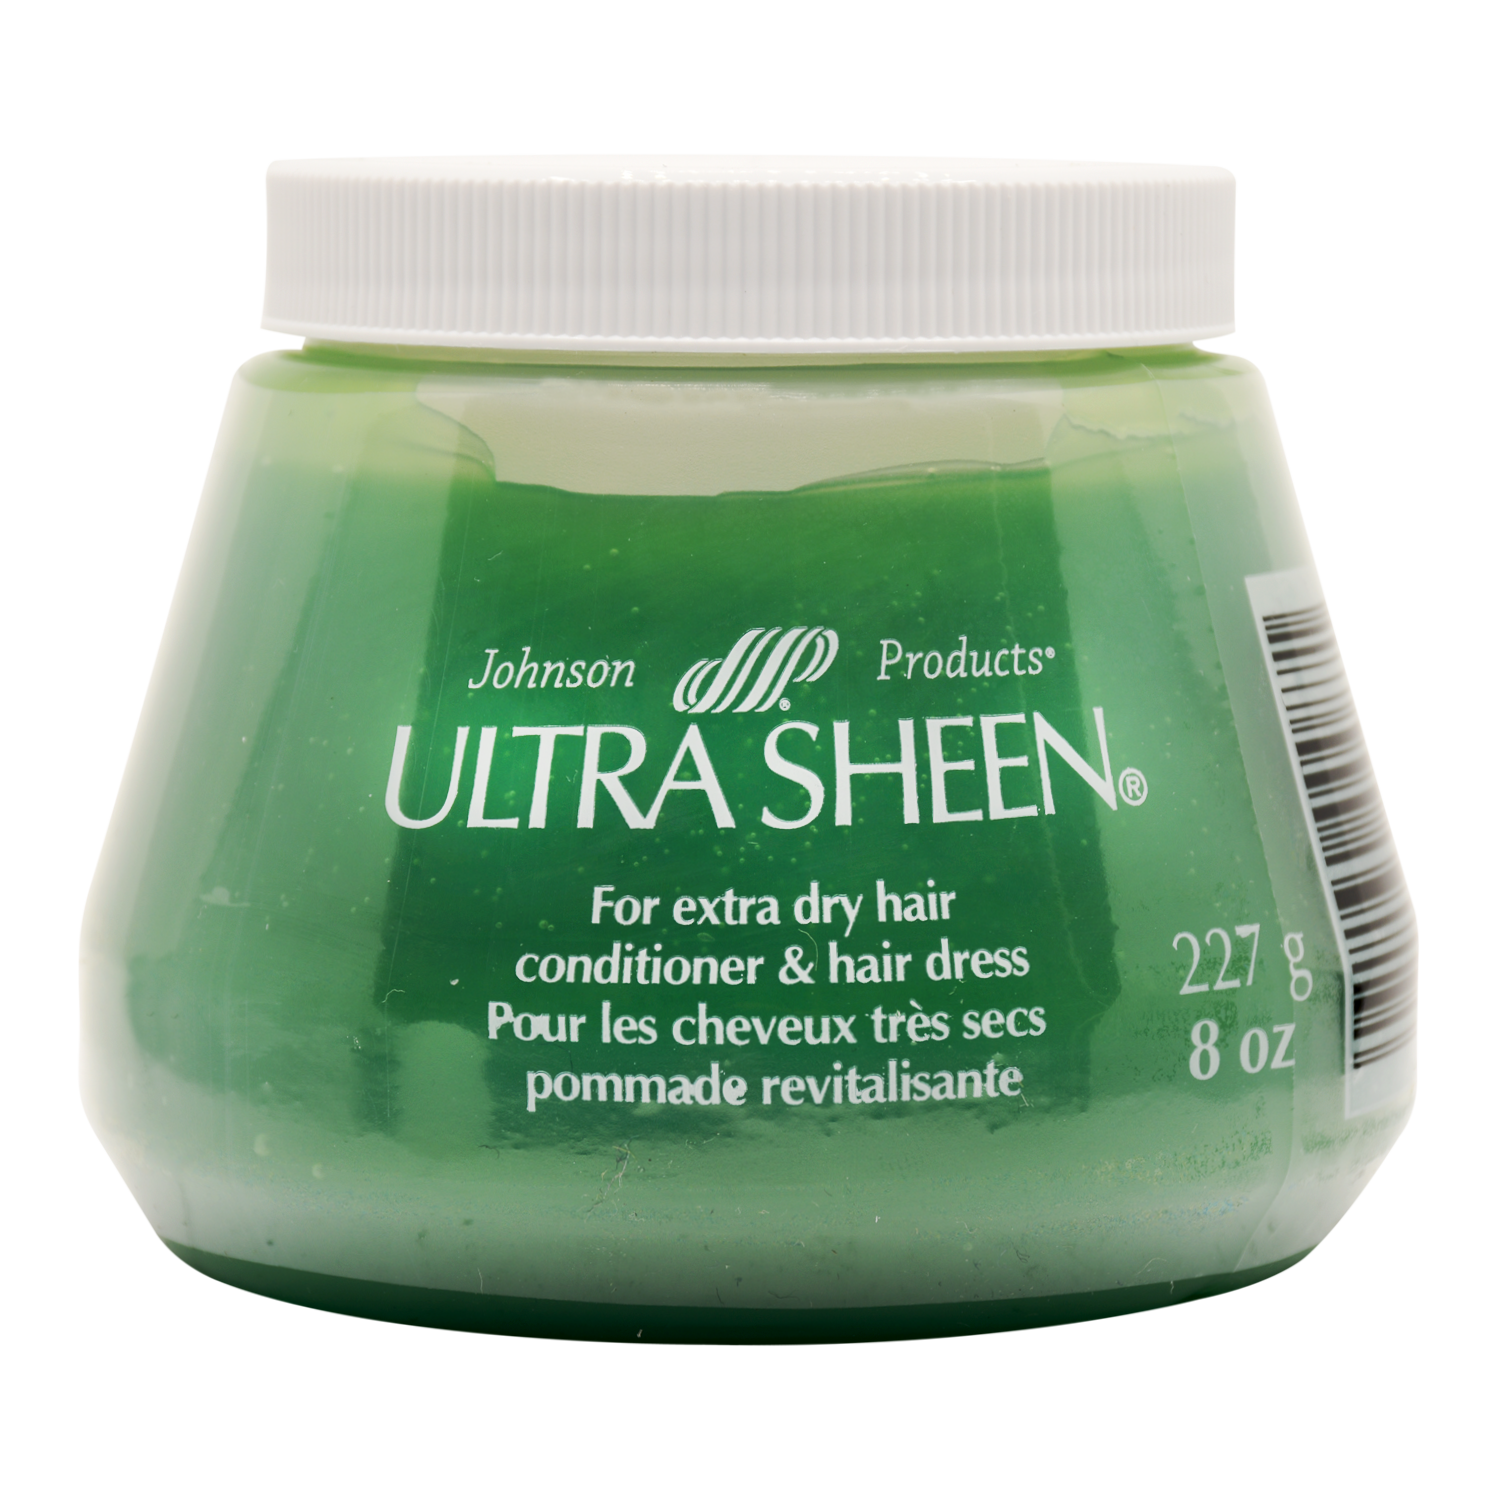 Ultra Sheen -  Conditioner & Hair Dress for  Extra-Dry Hair